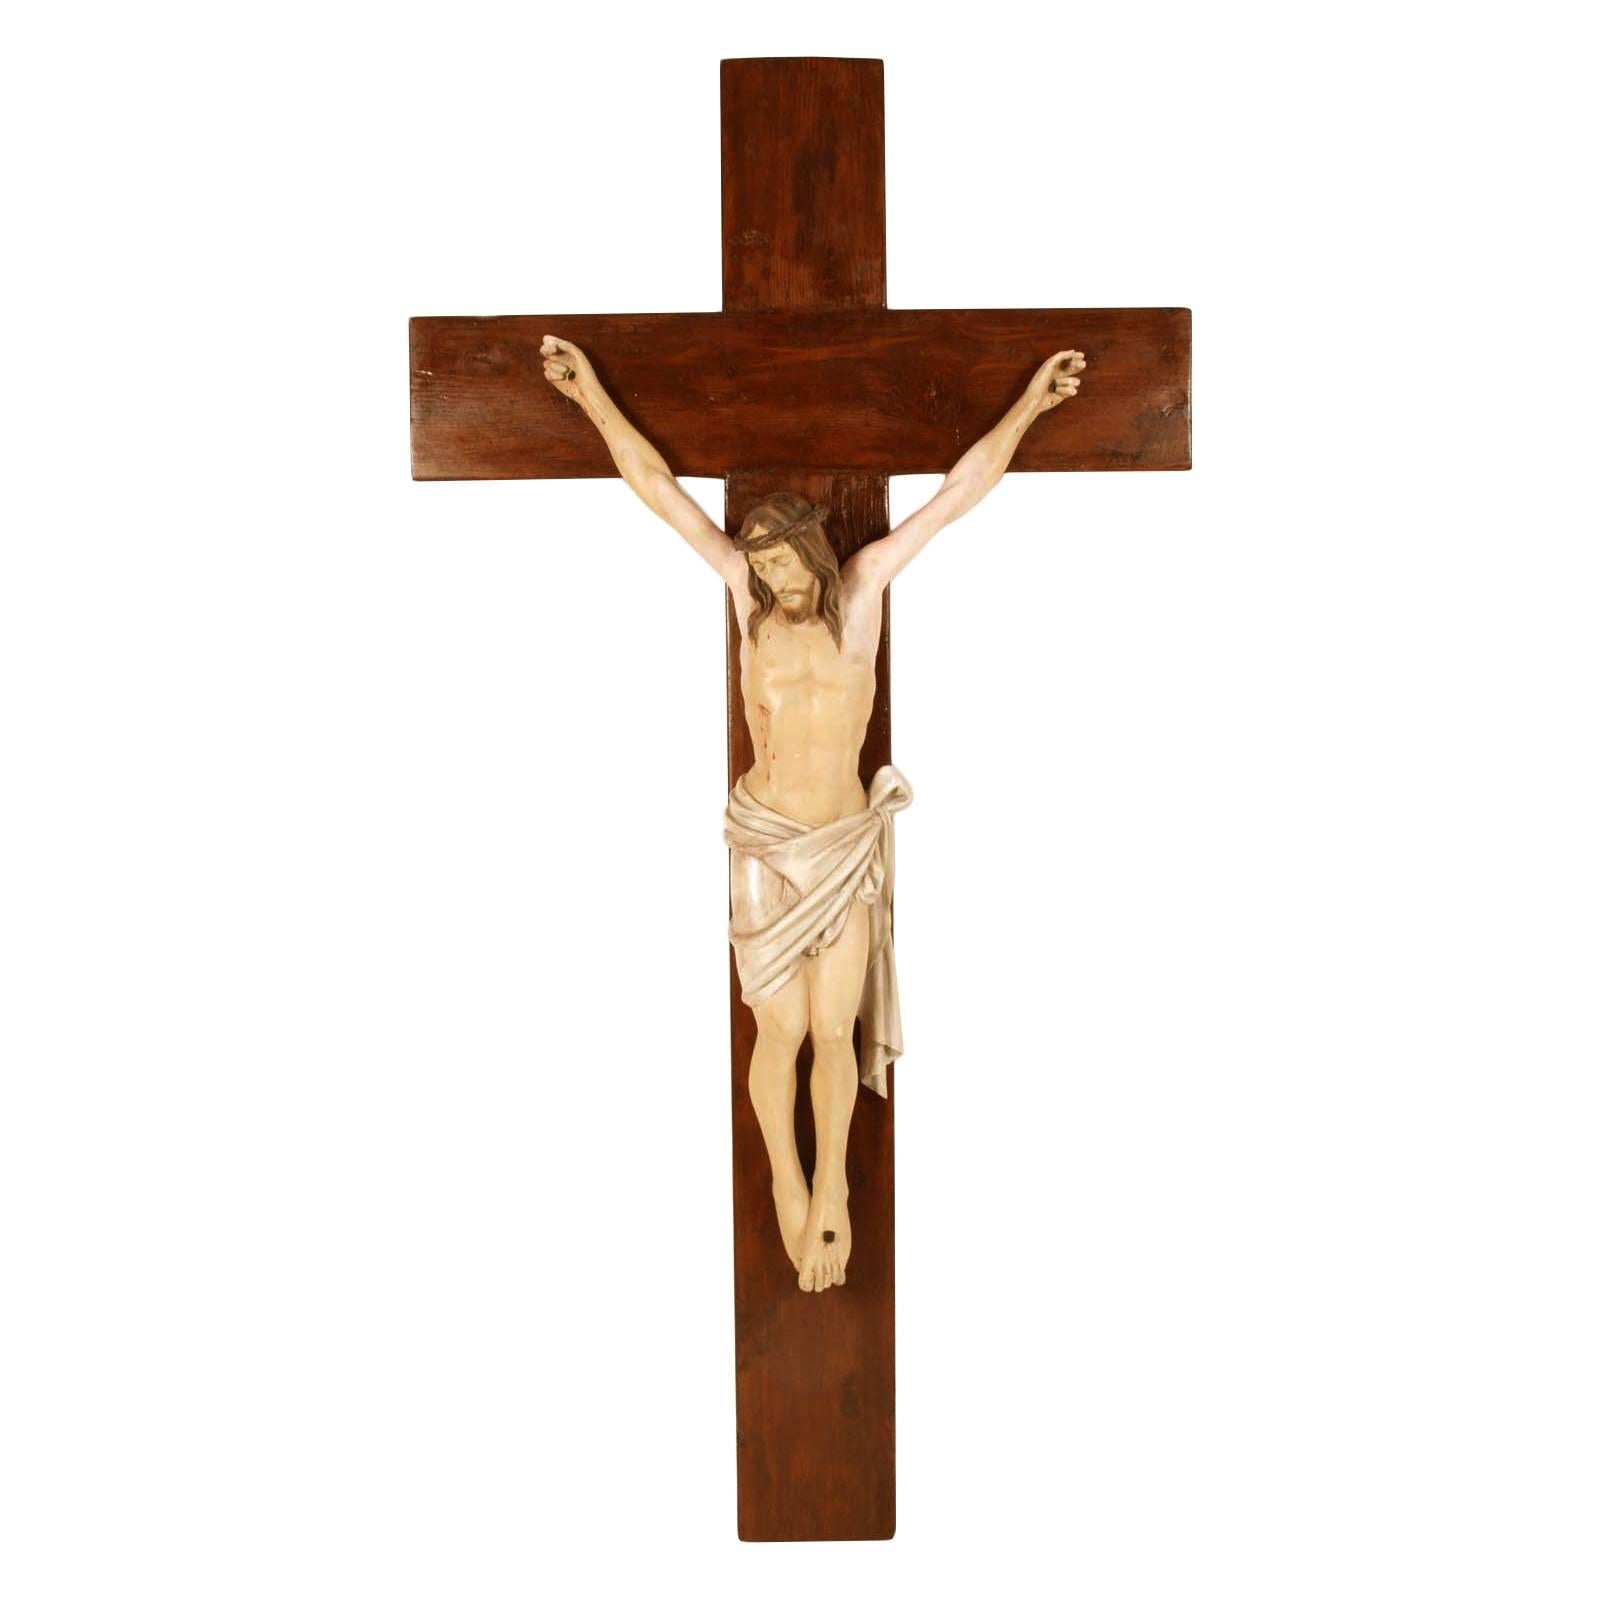 Late 19th Century Polychrome Wood Crucifix Attributable to Vincenzo Cadorin